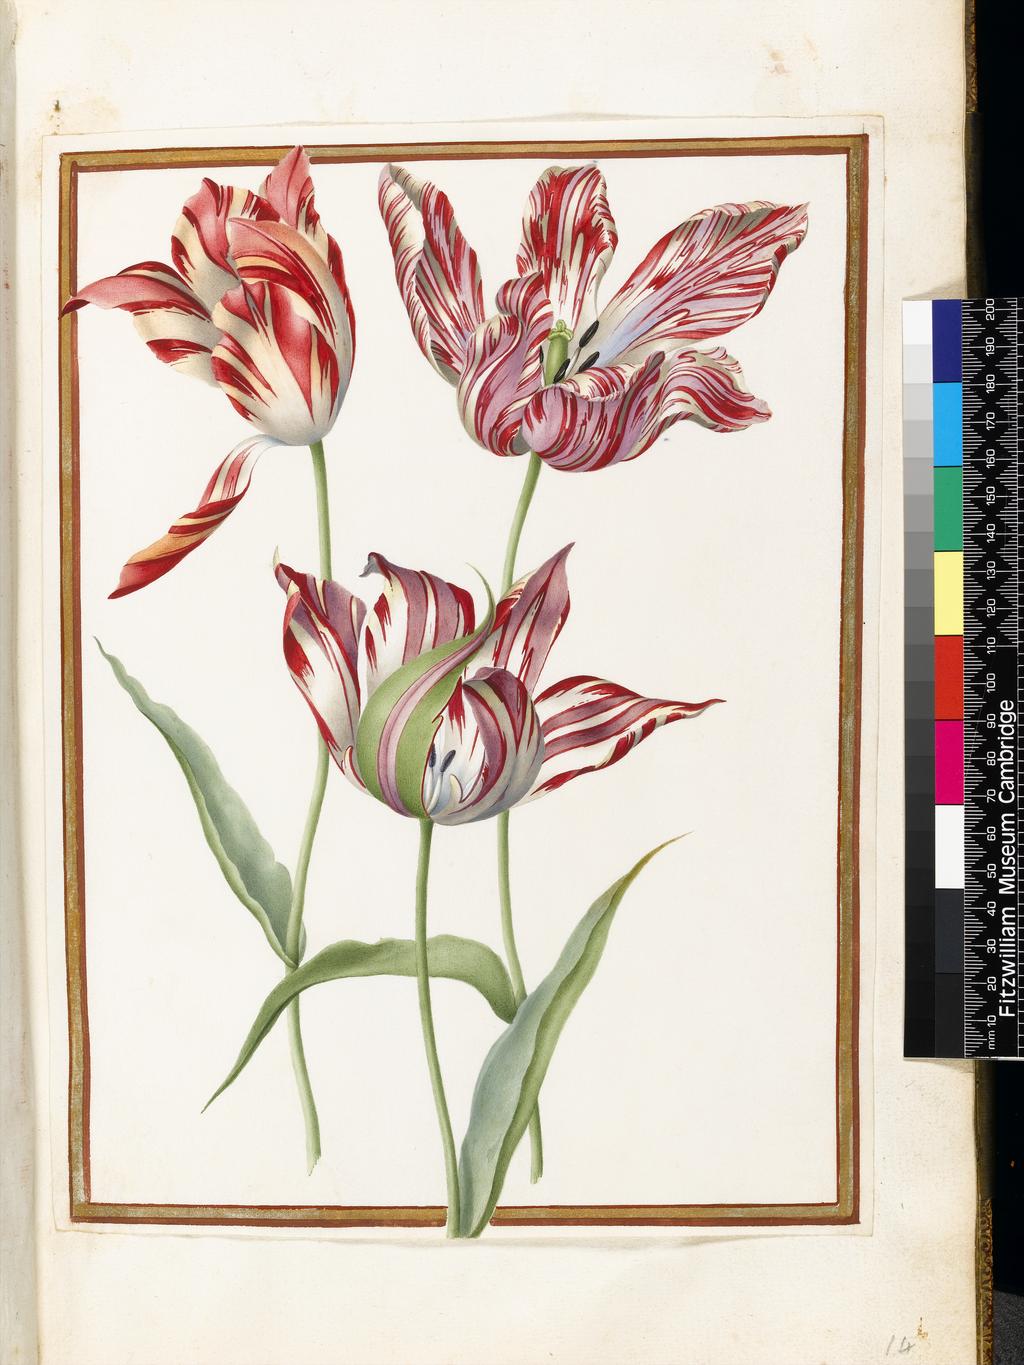 An image of Three 'broken' tulips. Robert, Nicolas attributed to (French, 1614-1685). Graphite, watercolour and bodycolour on vellum, height 300 mm, width 222 mm. Album containing 62 botanical drawings on vellum tipped in on the gilt-edged pages of the album which bear the watermark of an 18th century French paper-maker, Malmenayde of Thiers (active from 1731). Bound in red morocco with clasps, the spine tooled in gilt. The Pages are interleaved with thin protective paper. Ruled lines of red and gold border the drawings on all sides. 17th Century. French.